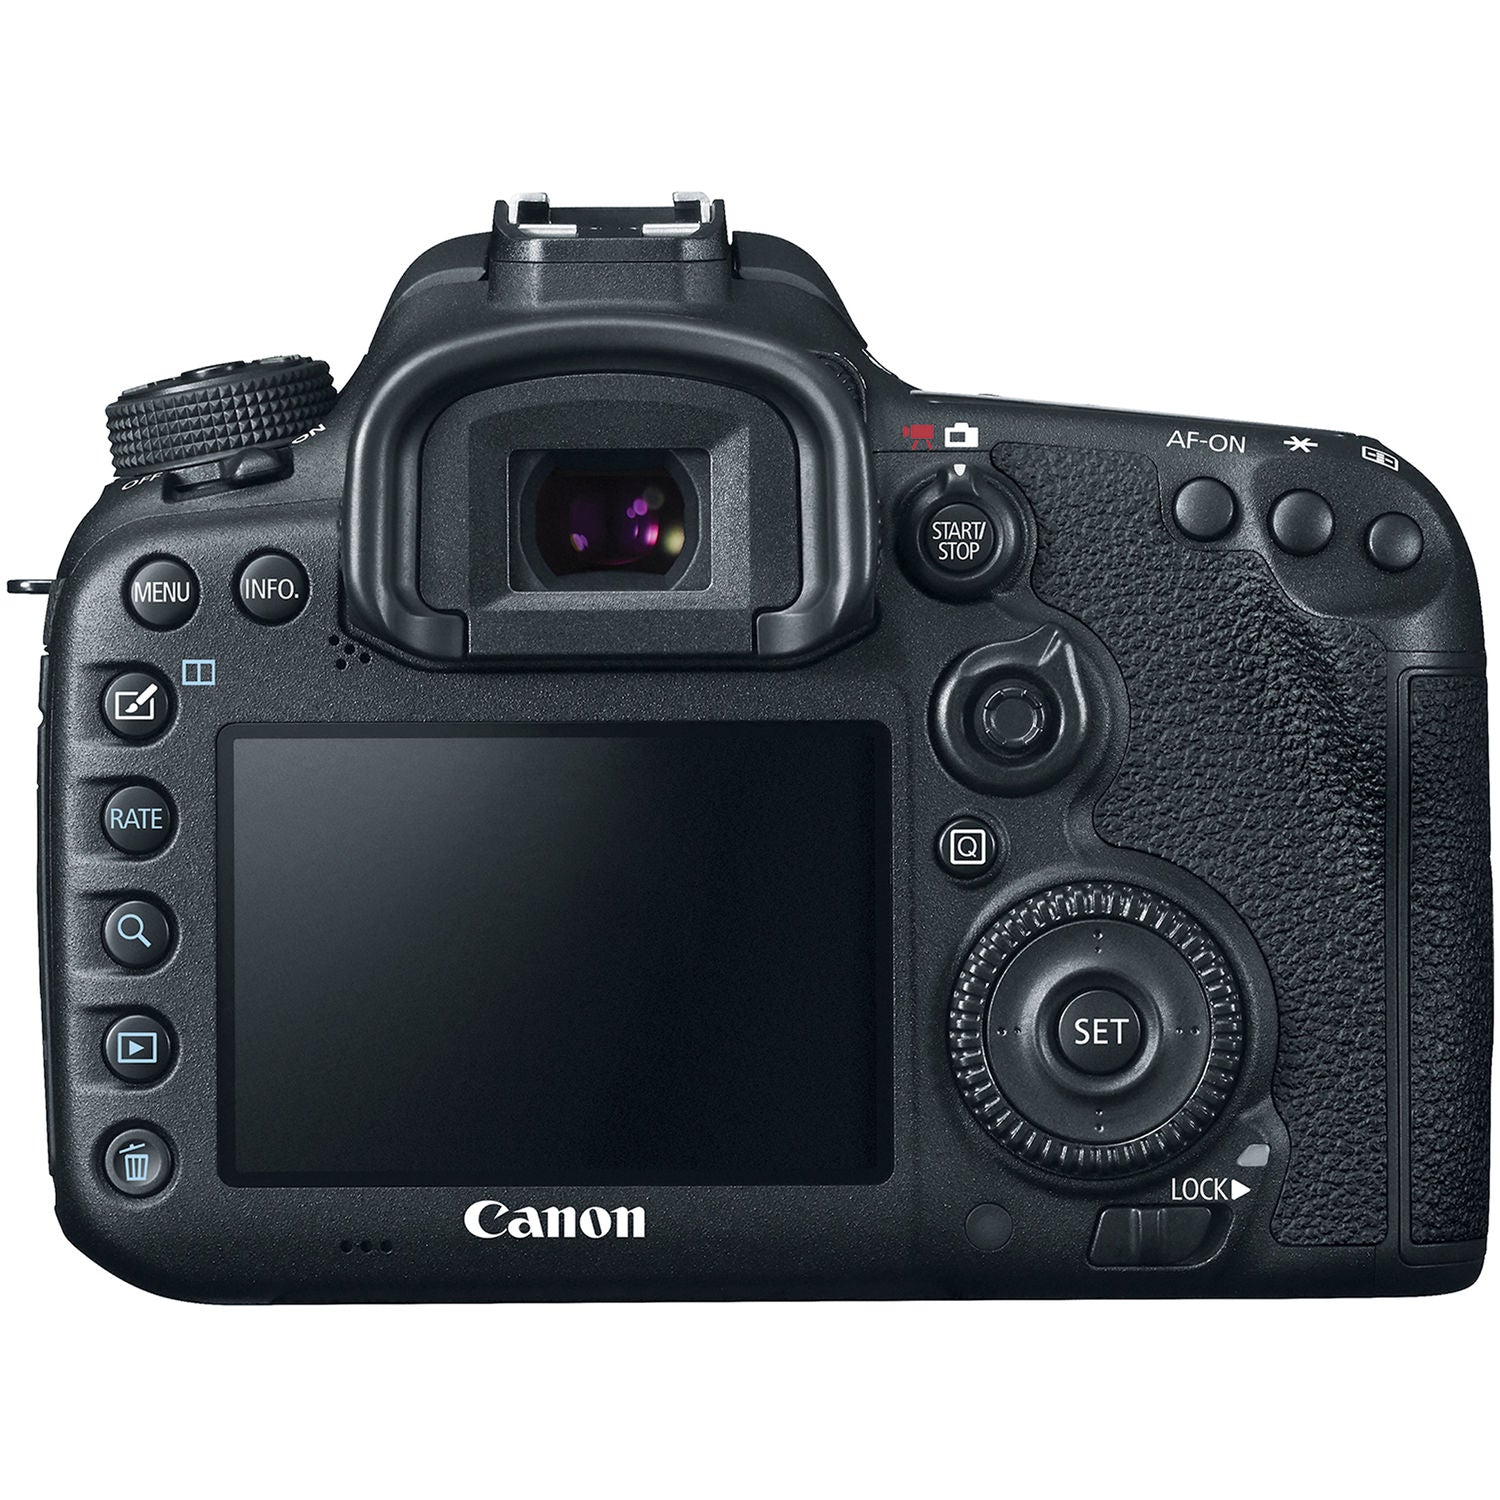 Canon EOS 7D Mark II DSLR Camera with 18-135mm Lens & W-E1 Wi-Fi Adapter With Memory Card Kit, Filter Kit and Cleaning Kit